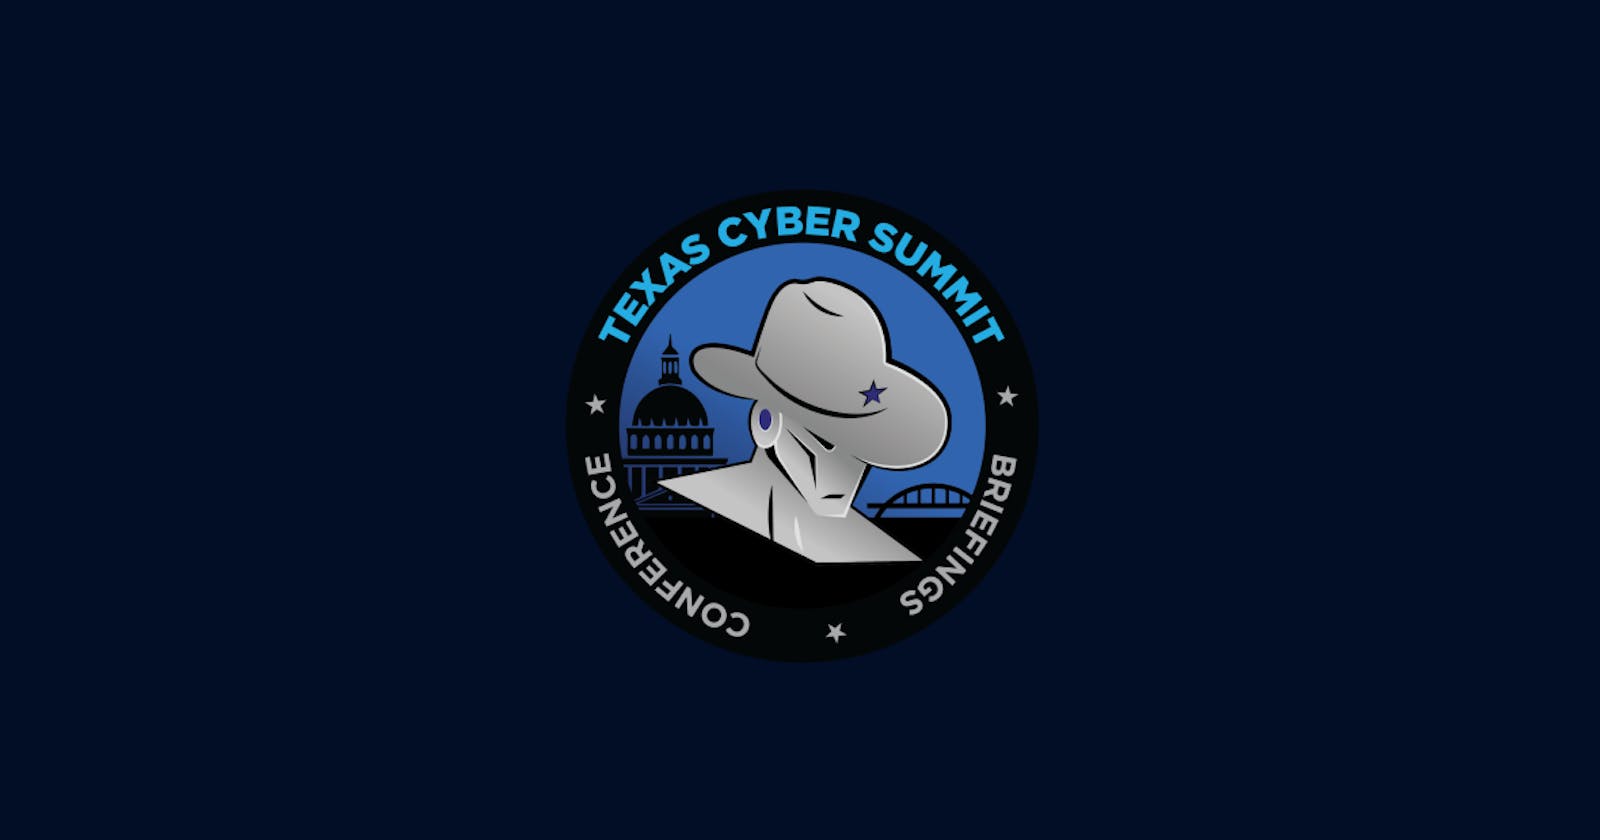 Cybersecurity and AI deep in the heart of Texas Cyber Summit